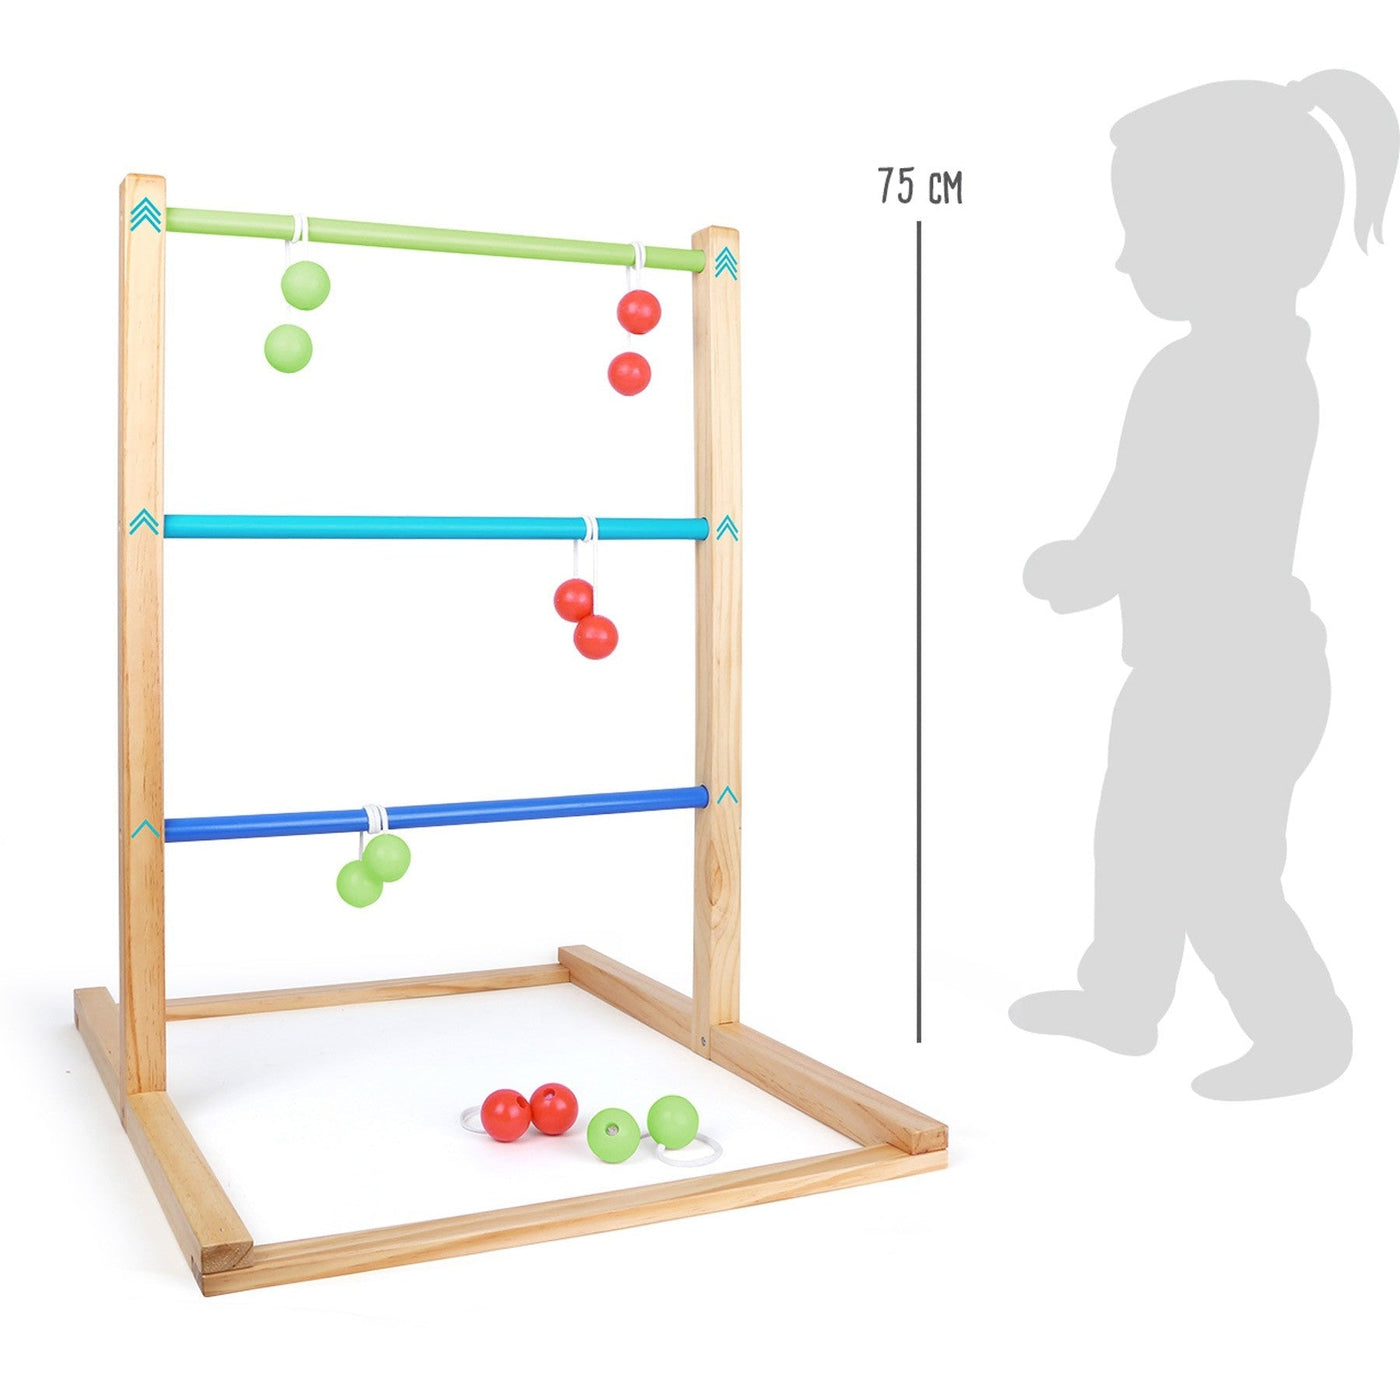 Ladder Golf Throwing Game "Active"